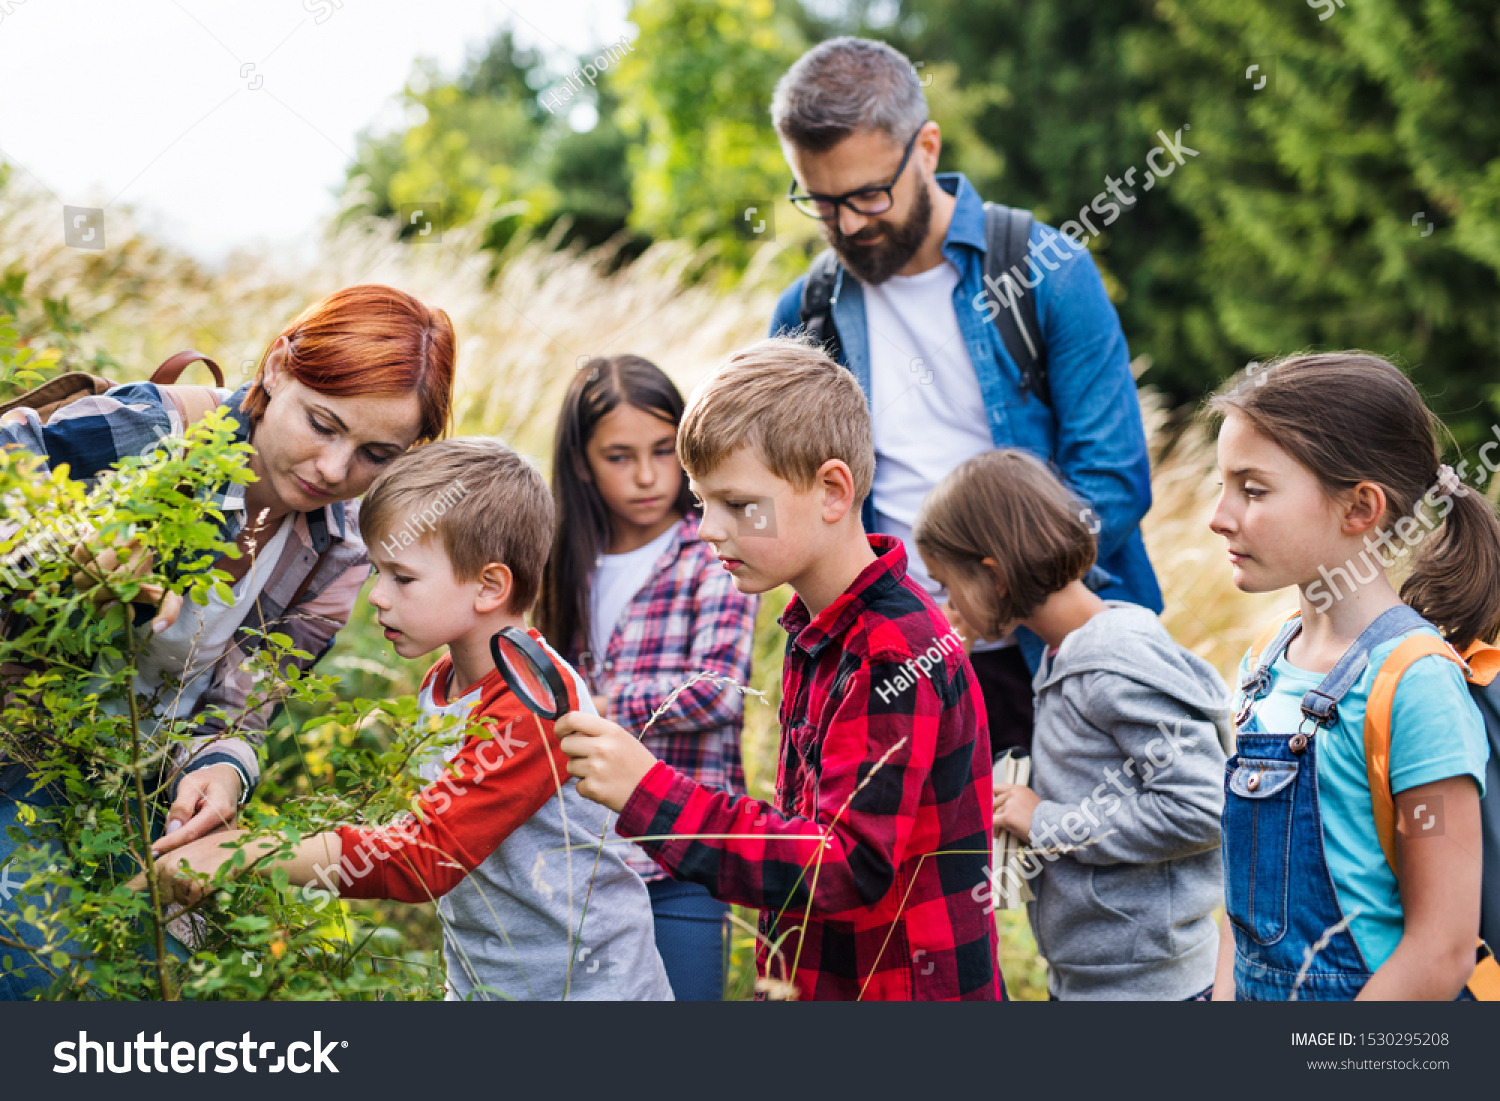 Group of school children with teacher on field trip in nature, learning science. #1530295208